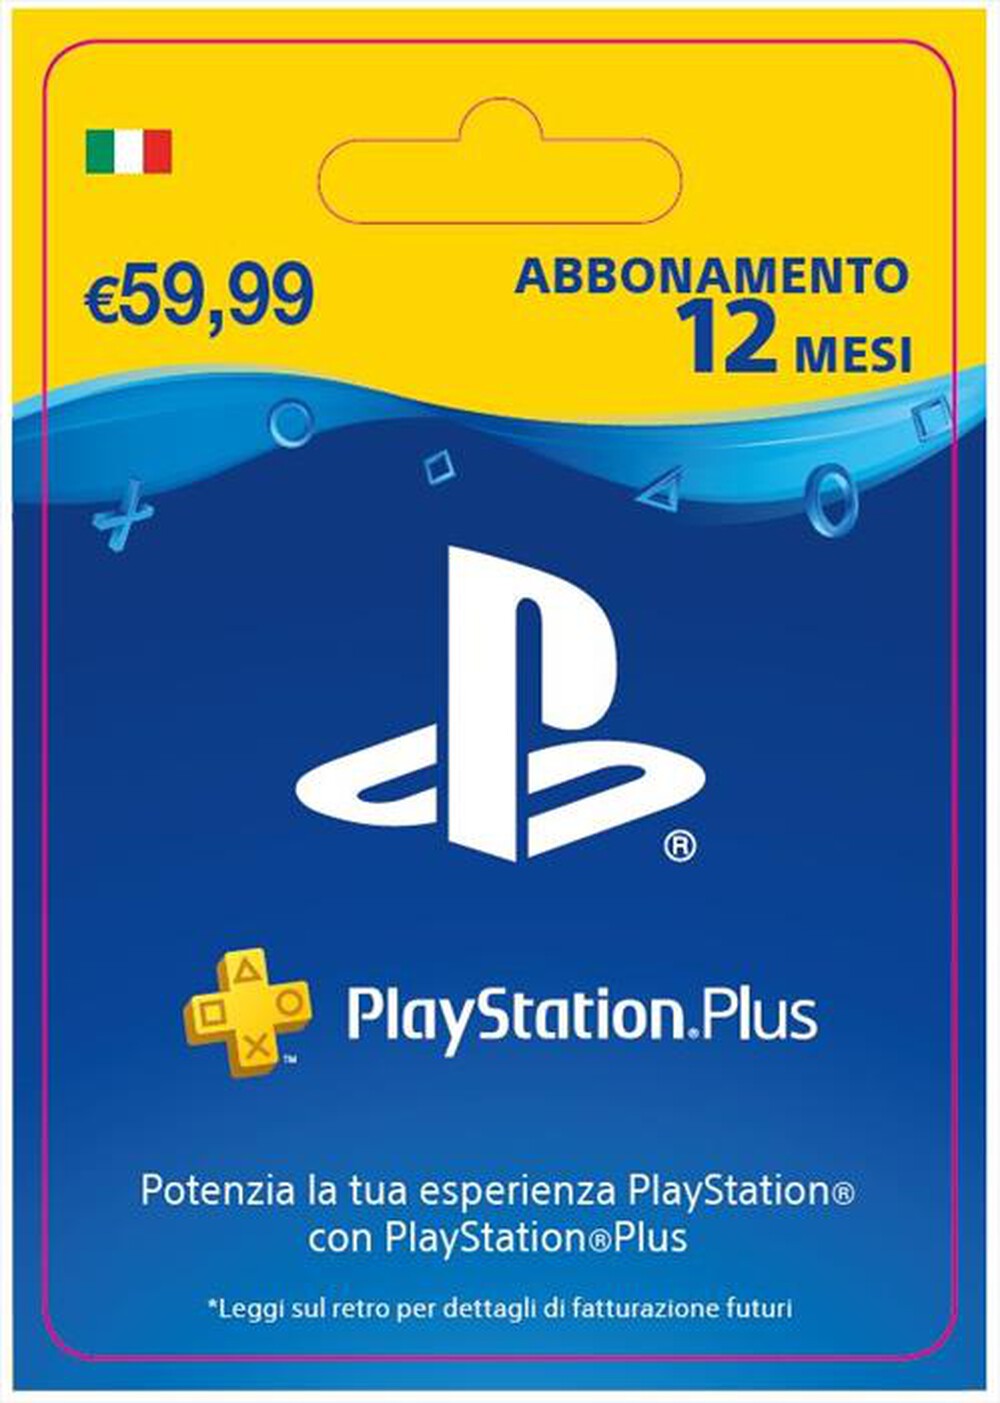 "SONY COMPUTER - PS4 Branded PlayStation Plus Card 365GG"